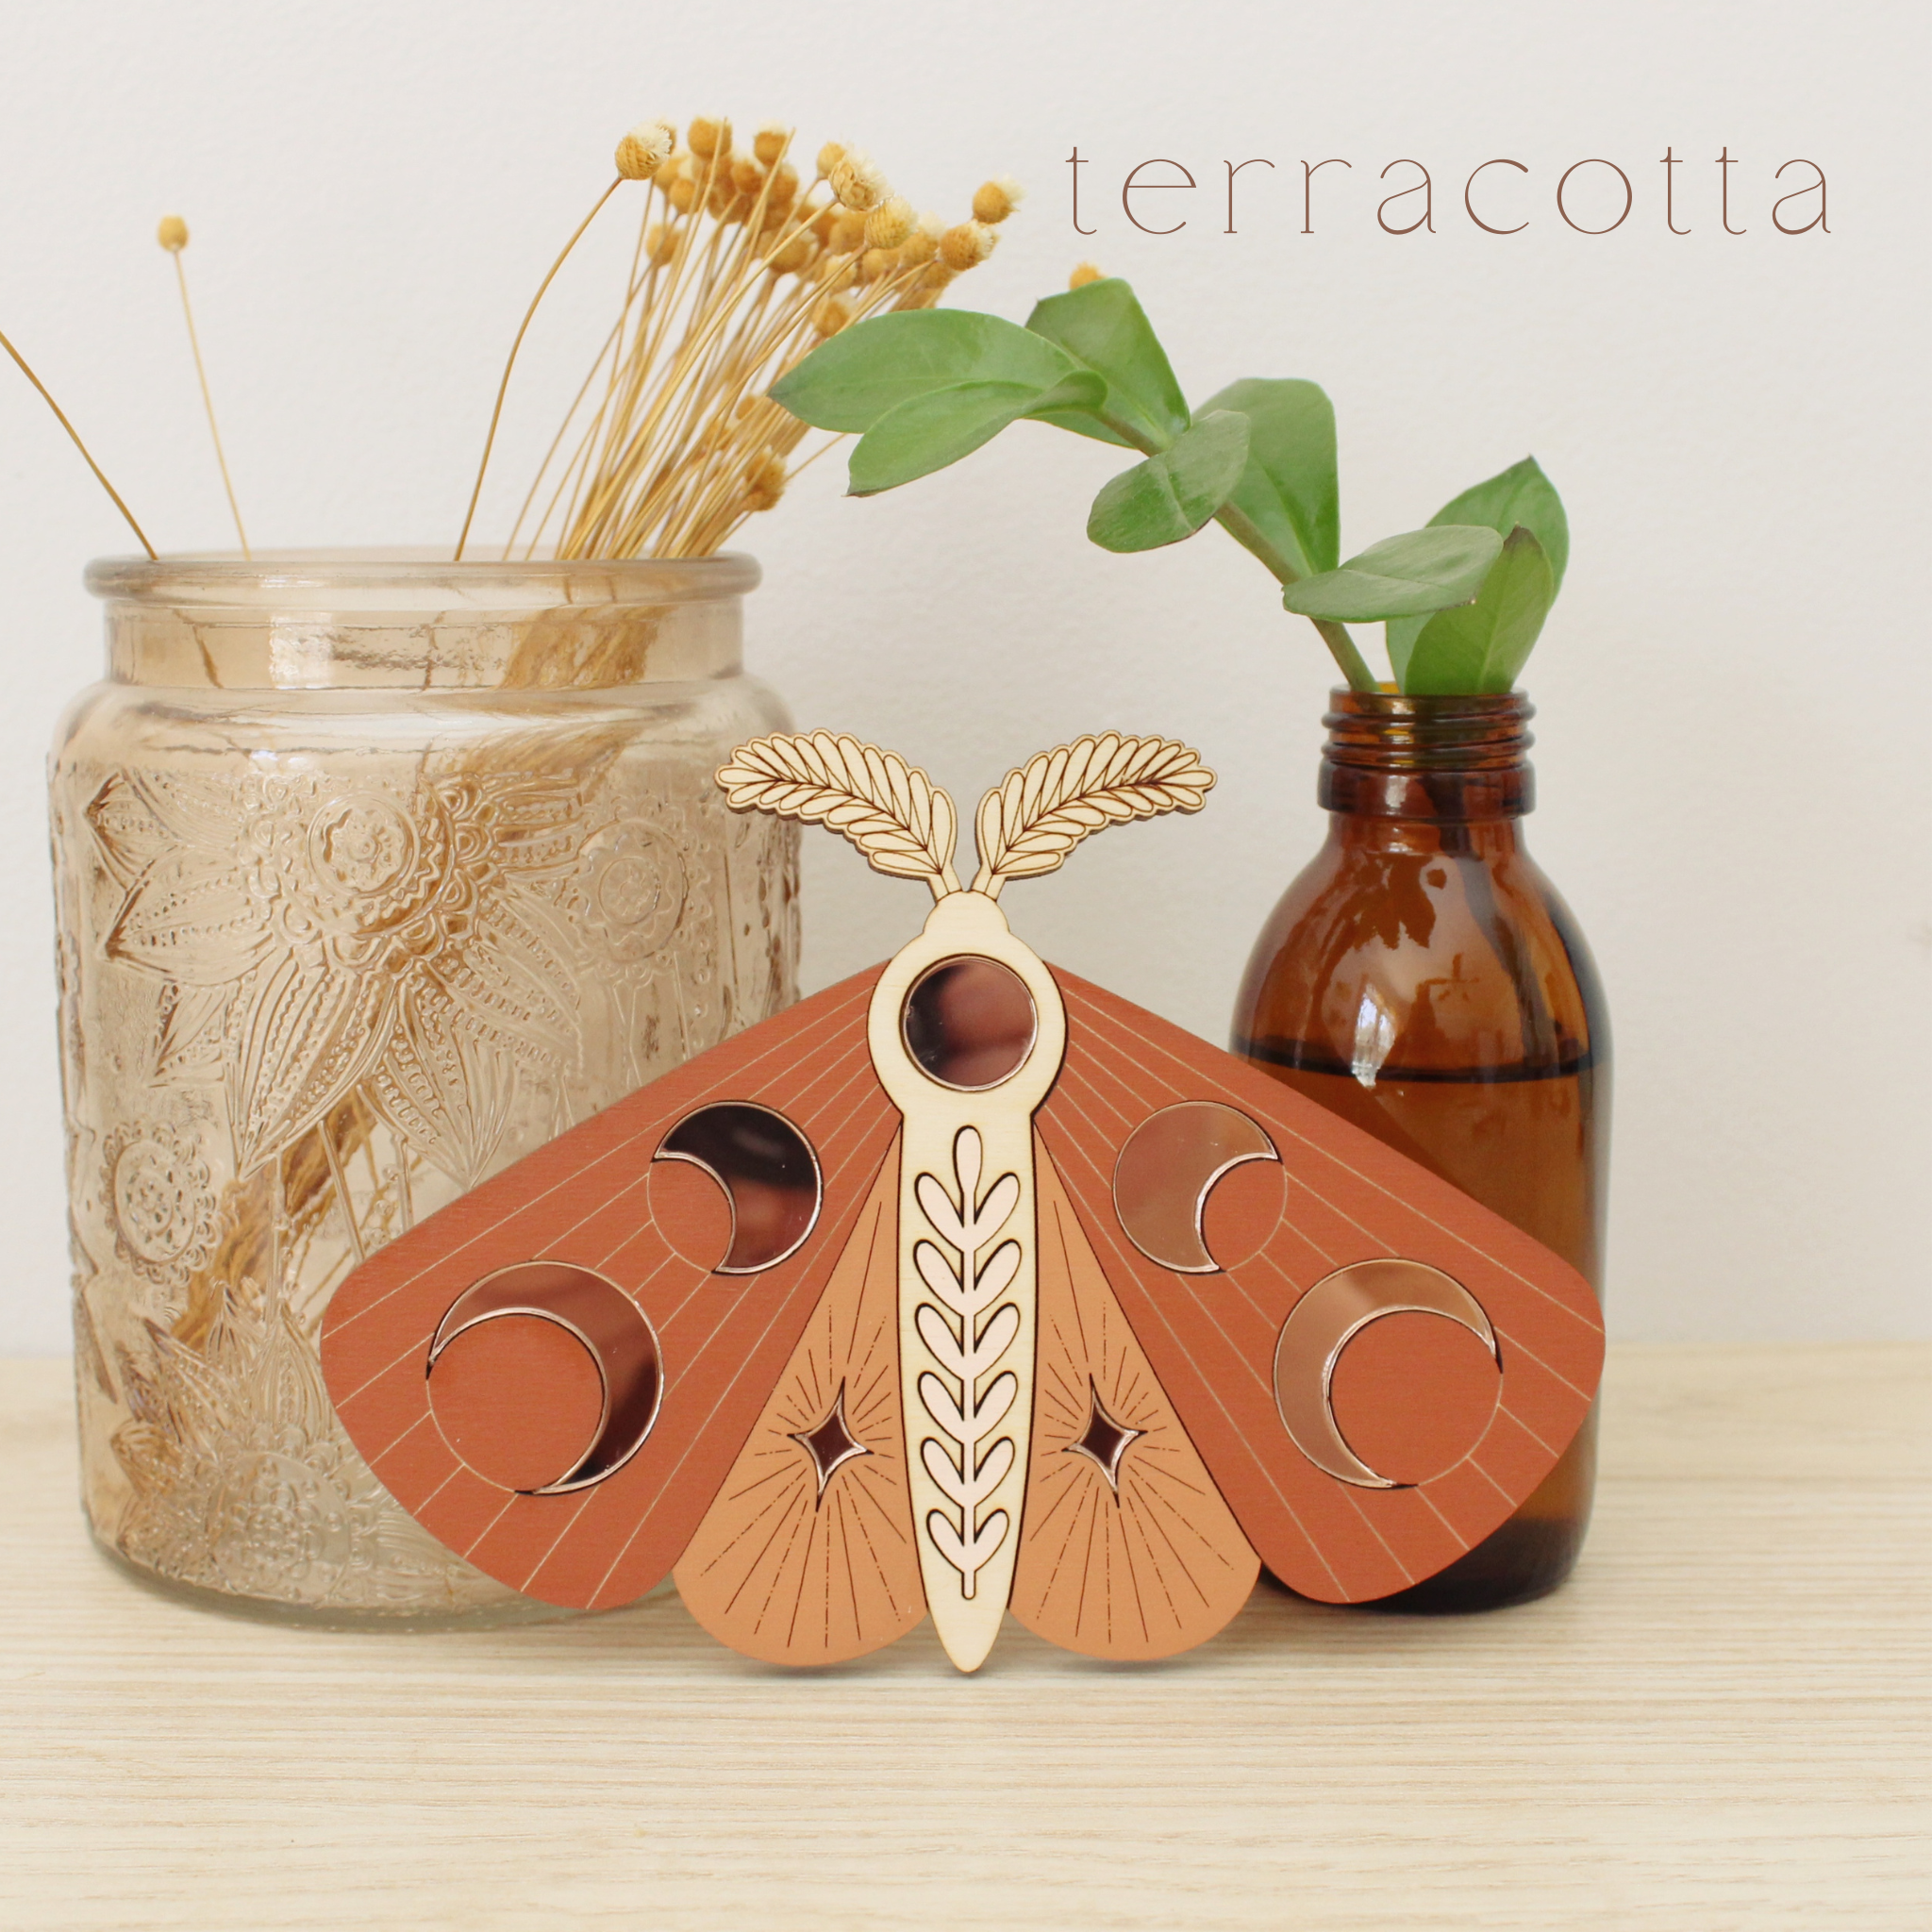 wooden moth with moon phase design. painted in orange and terracotta reds with wood tones and mirrored rose gold moon phase inlays.